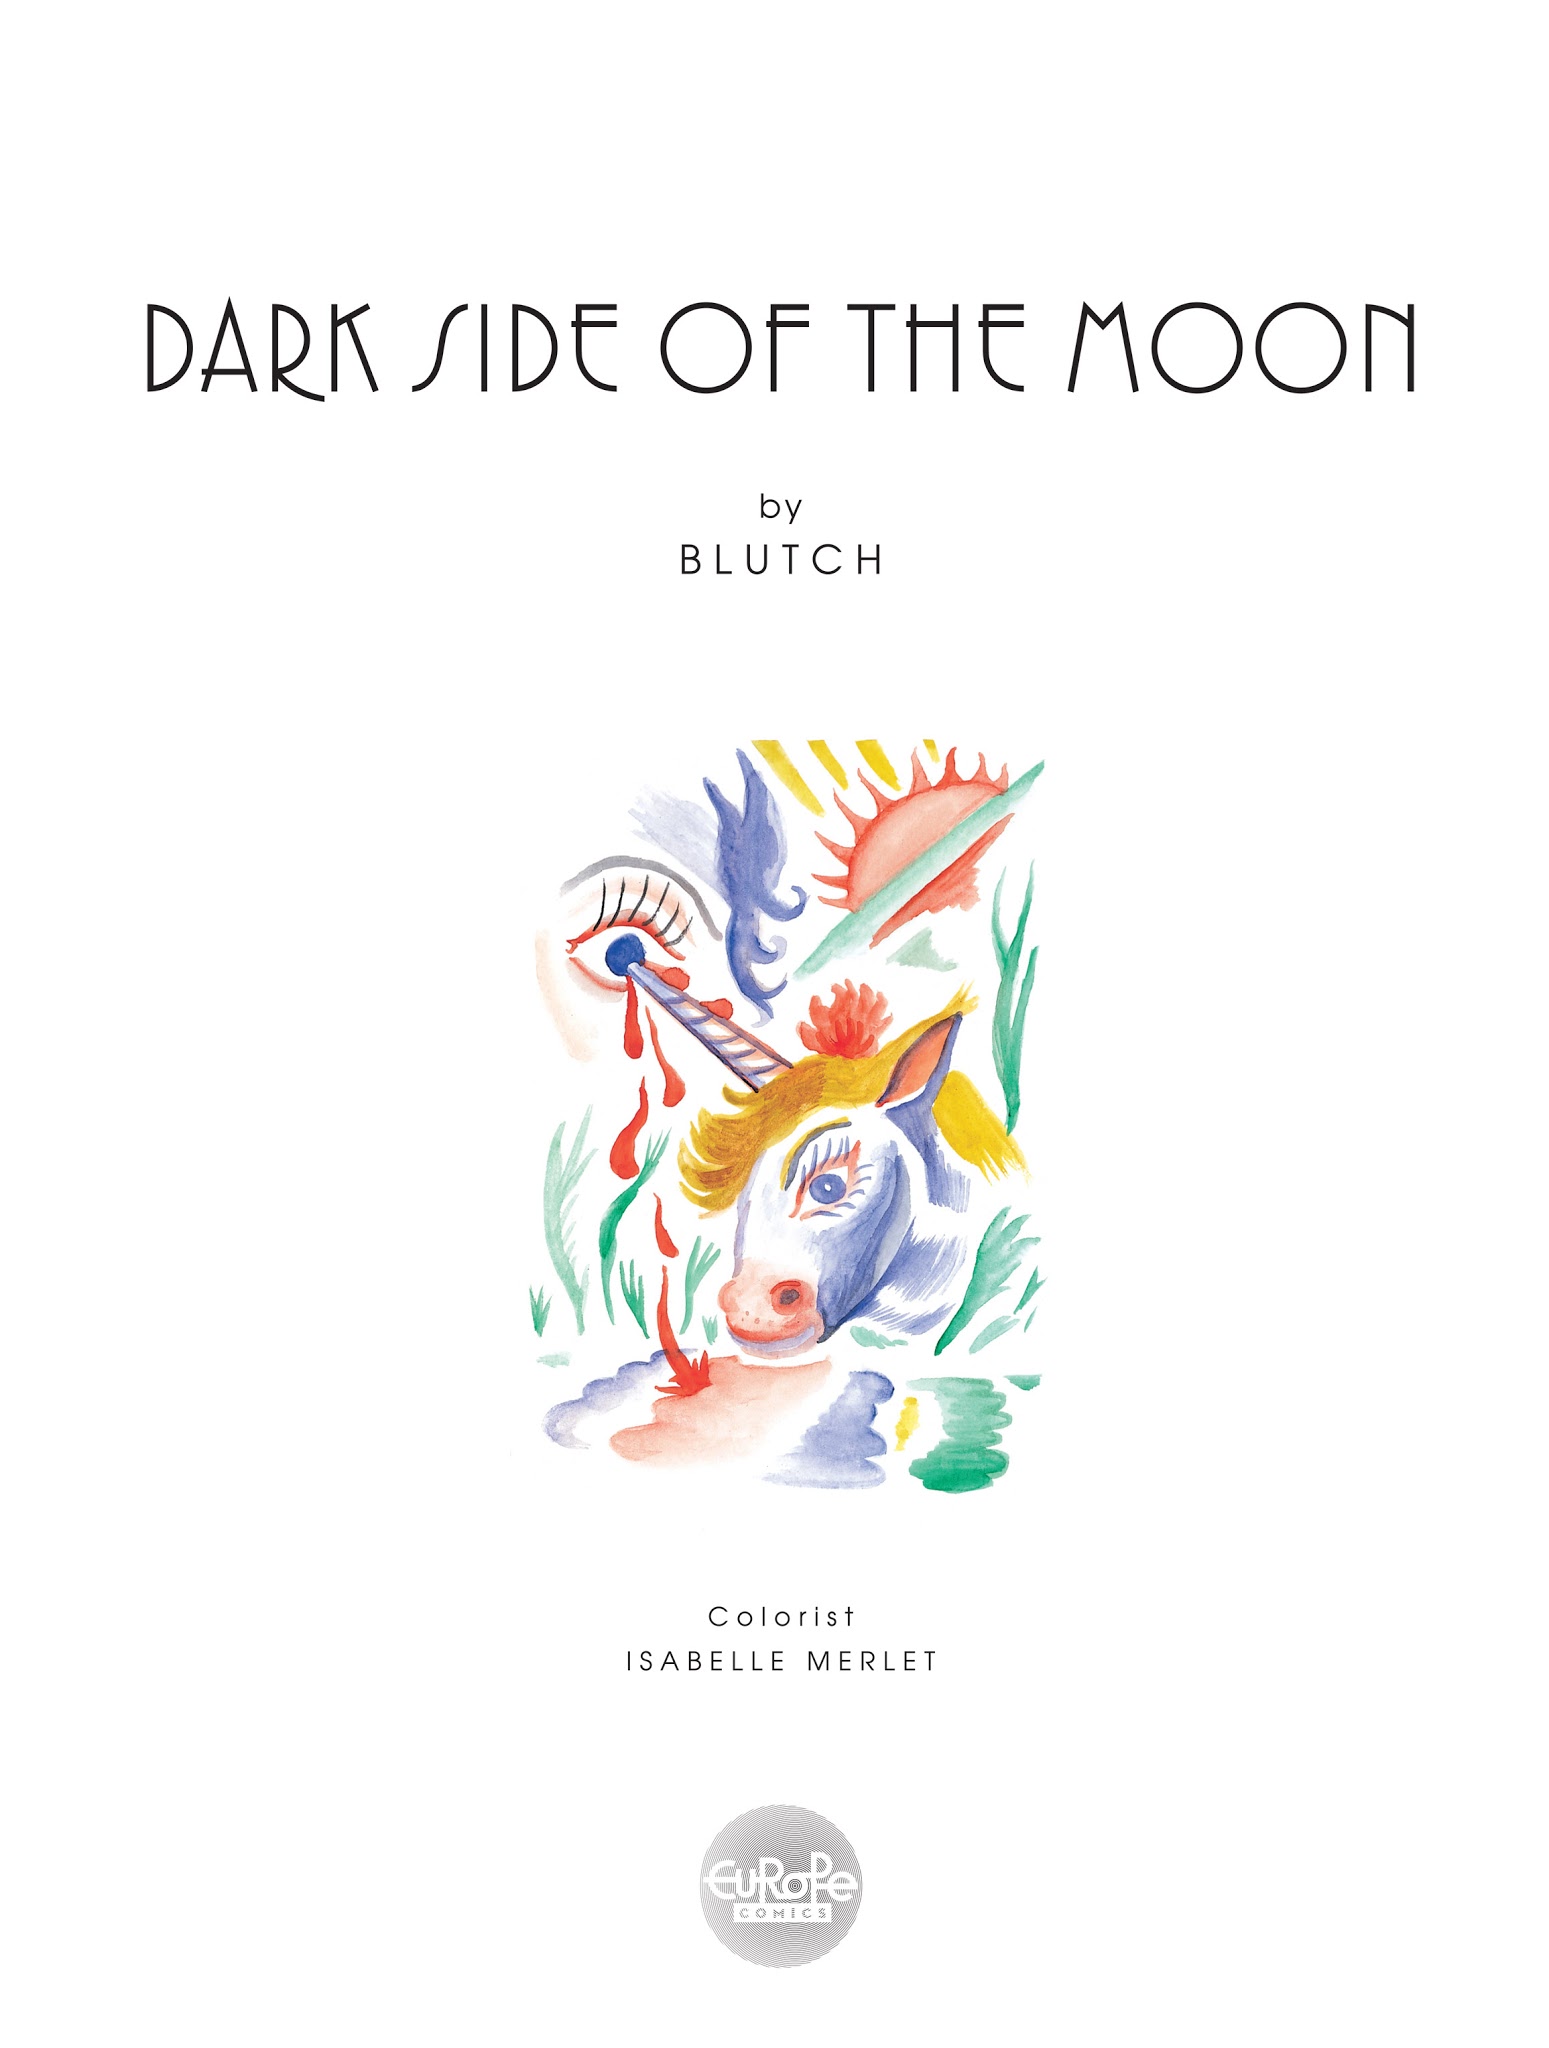 Read online Dark Side of the Moon comic -  Issue # TPB - 3